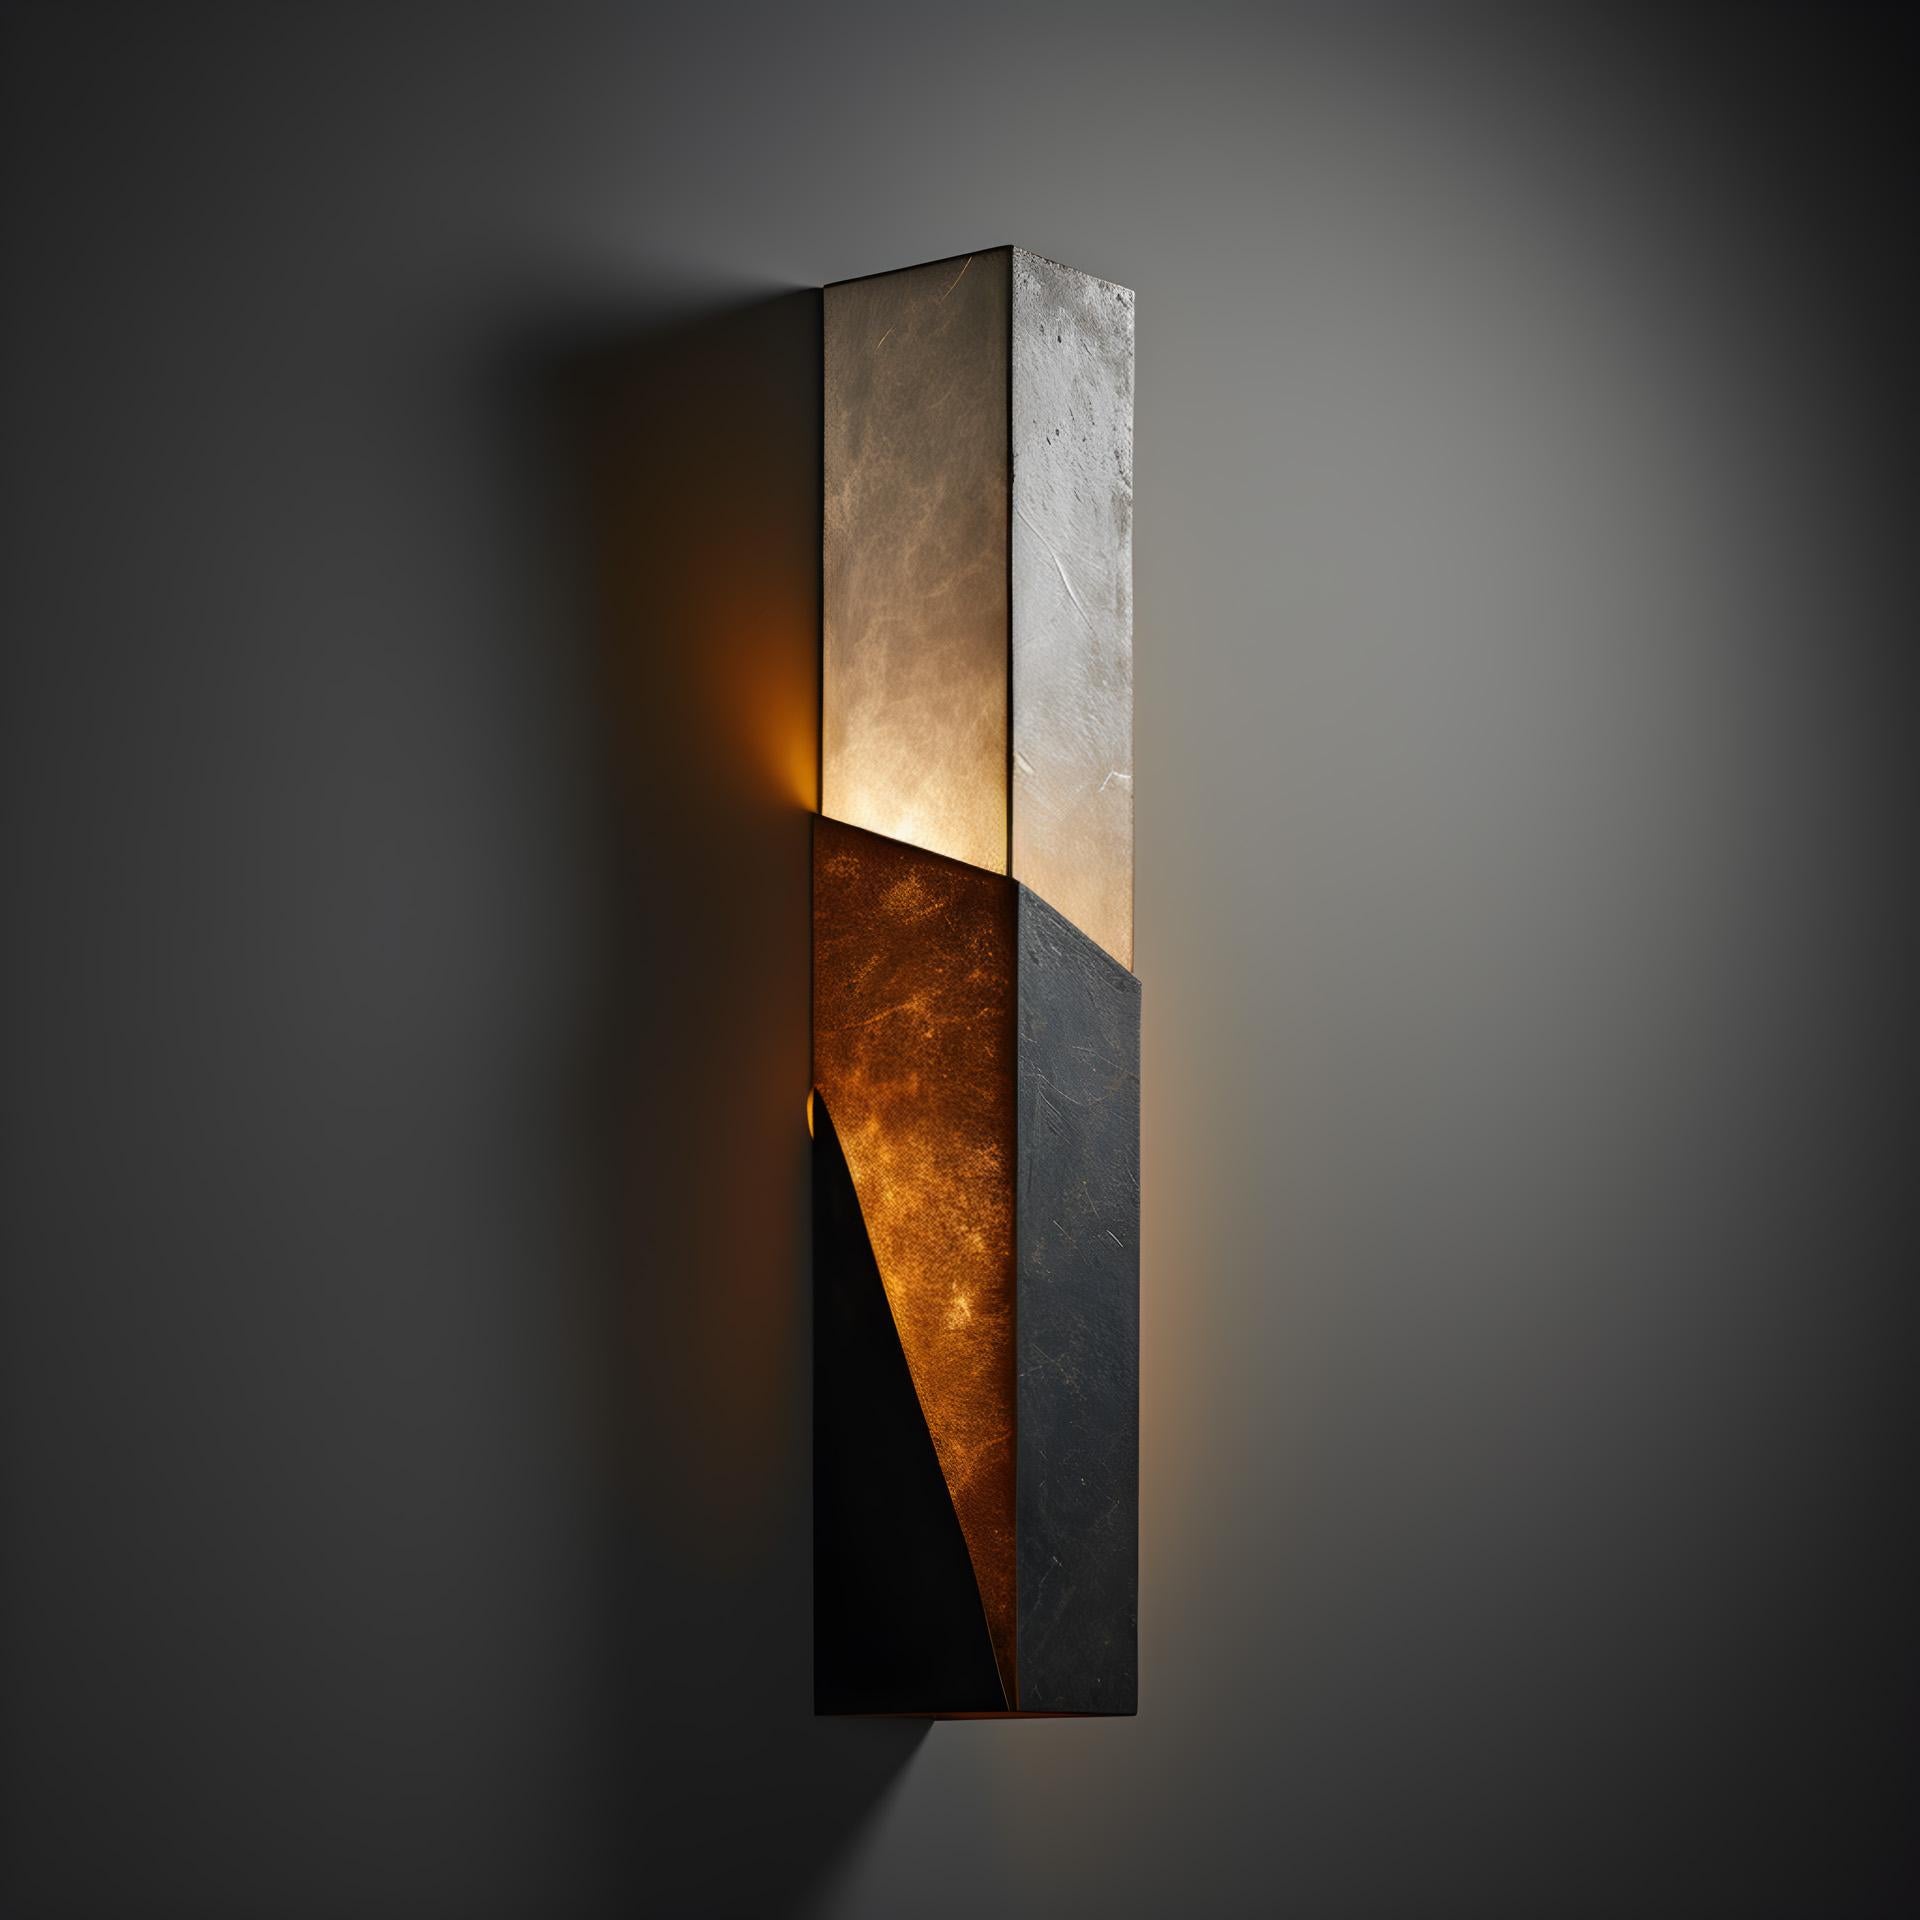 Ju Sconce by objective OBJECT Studio
Dimensions: D 10 x W 10 x H 71 cm 
Materials: Steel, plaster, led.

objective OBJECT
an embodiment of our architectural ethos.

We represent an unwavering dedication to truth, impartiality, and the profound